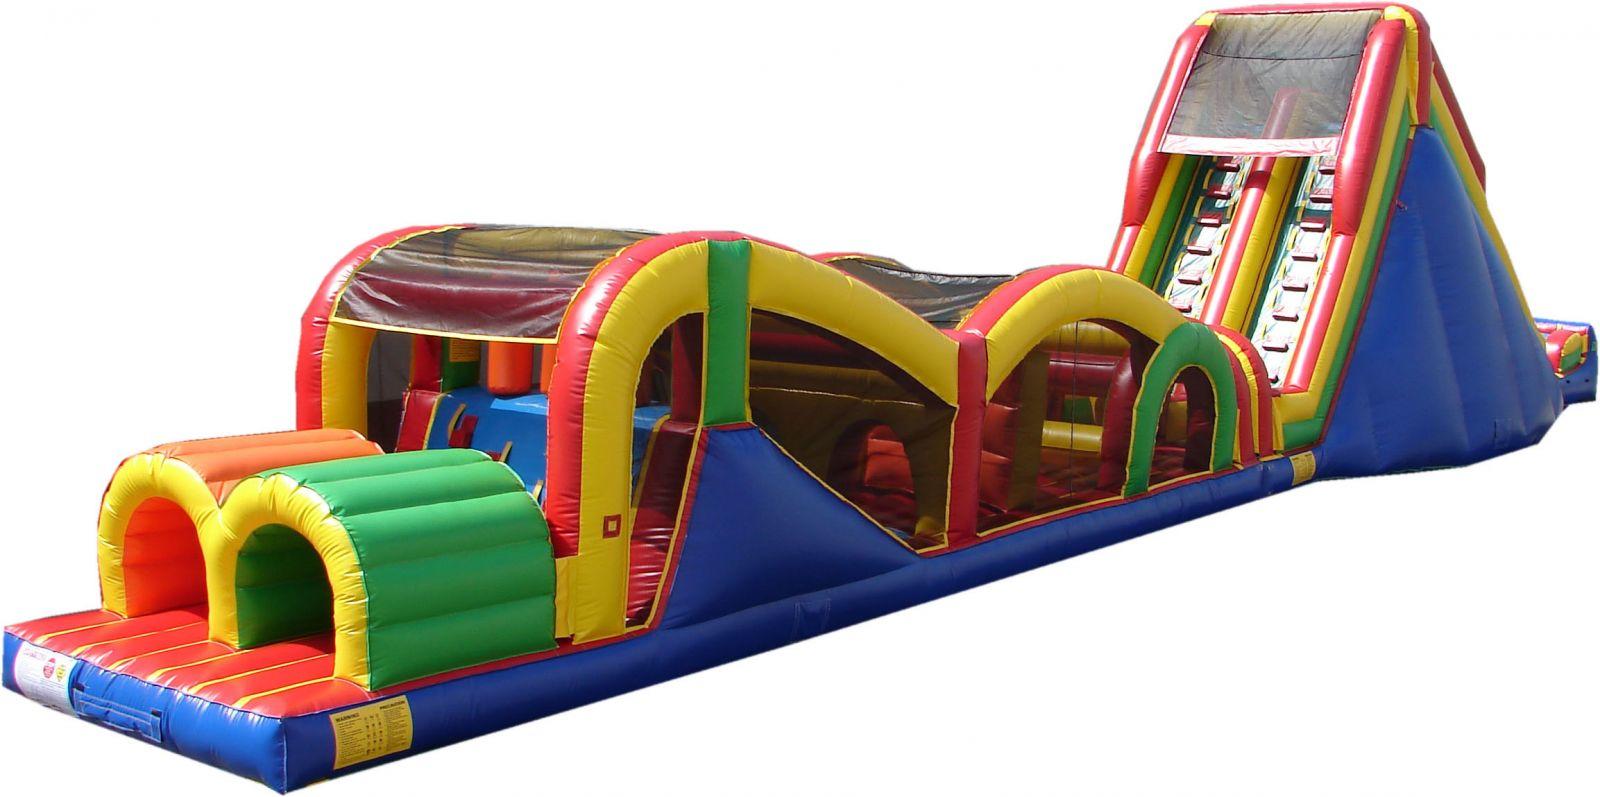 Inflatable Obstacle Course Rental in Elmhurst